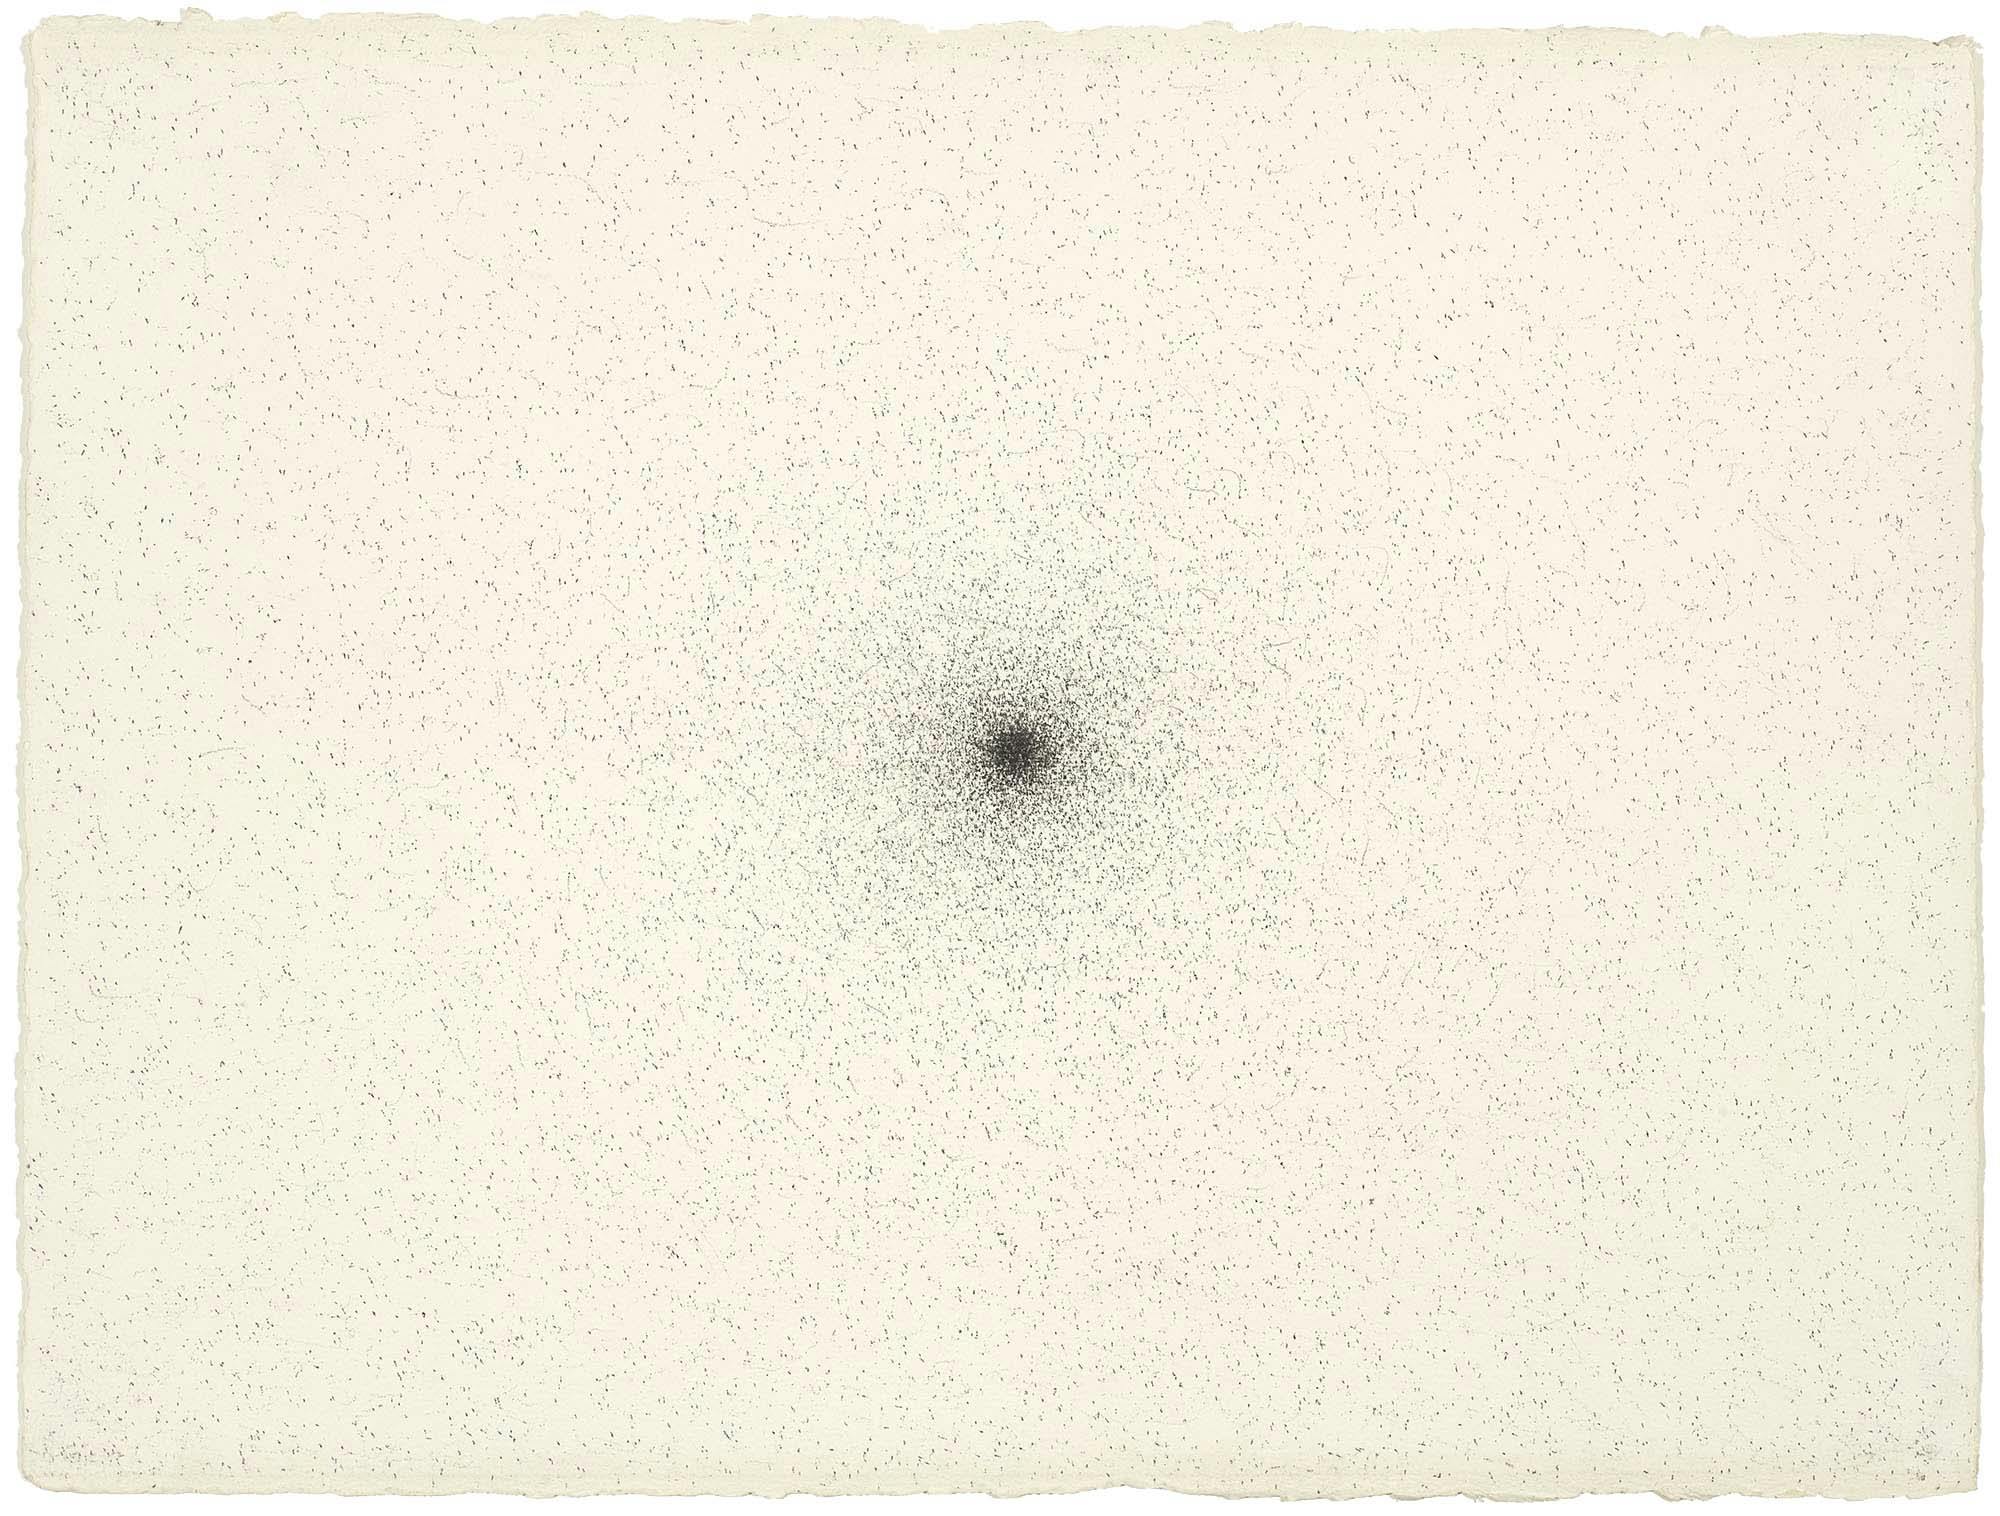 Particle Implosion
1976
Graphite on paper
22 1/2 x 30 in. (57.2 x 76.2 cm)
 – The Richard Pousette-Dart Foundation